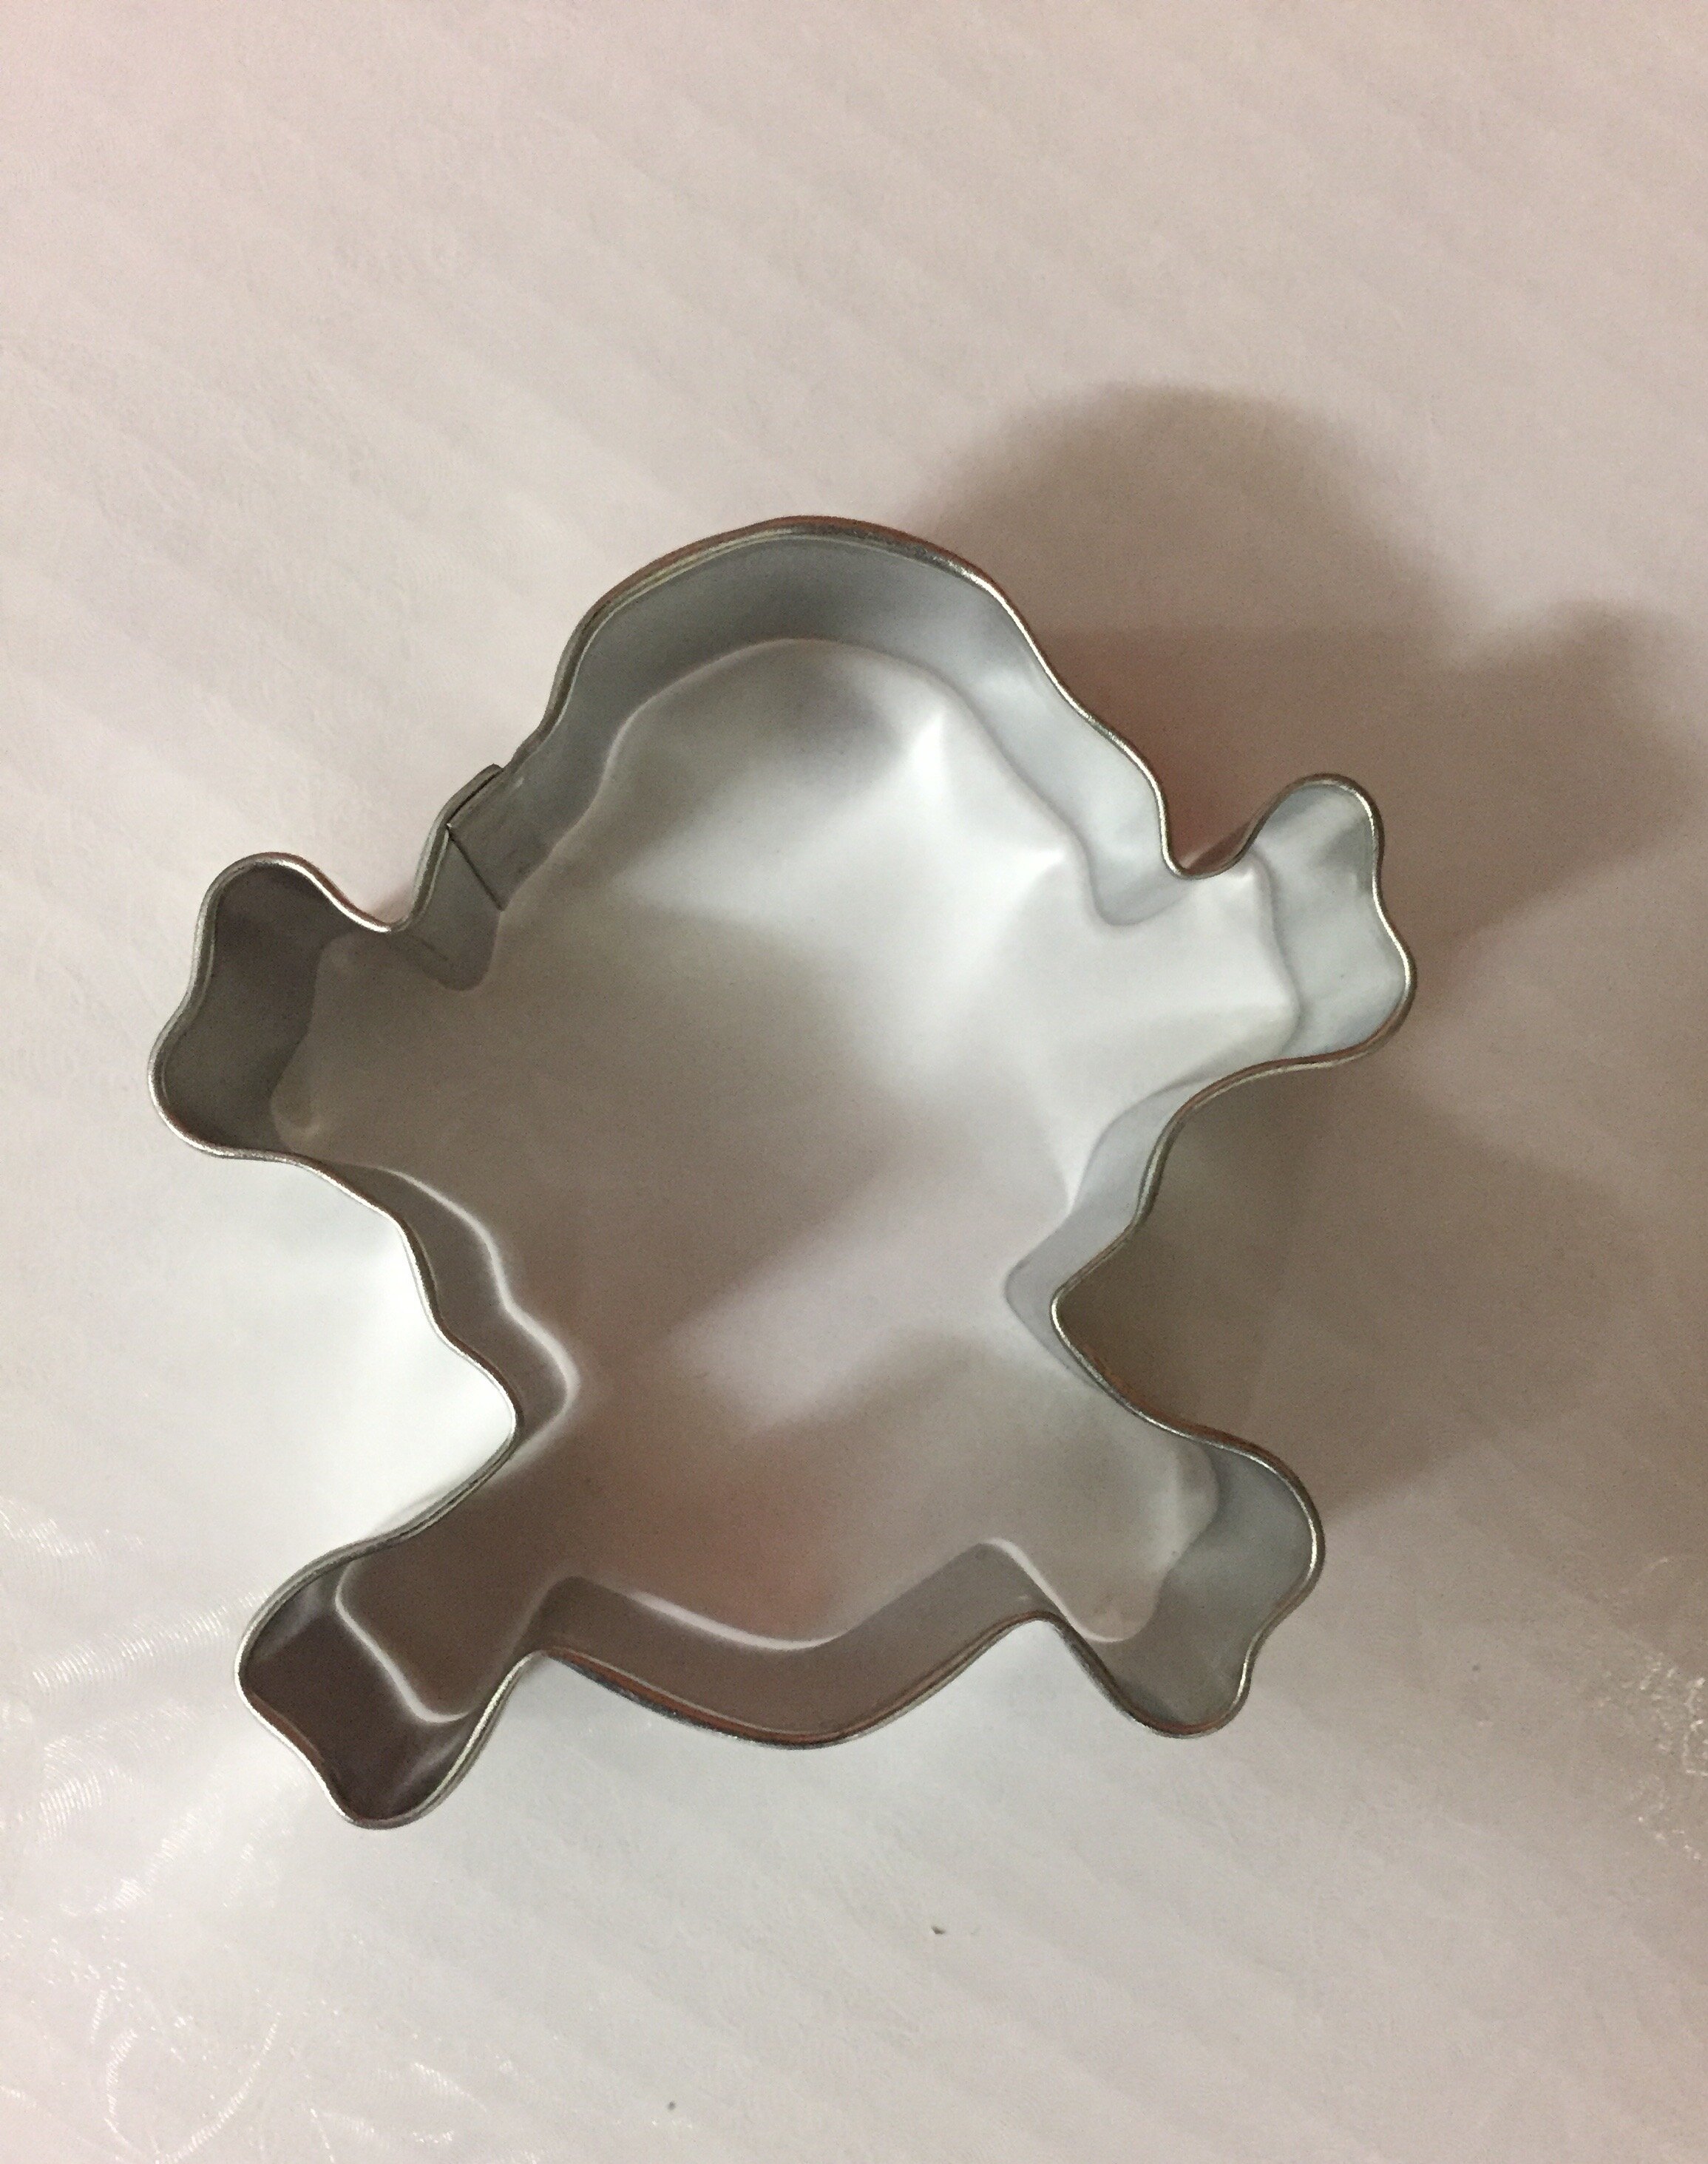 Frog Cookie Cutter 3 — CAKE LADIES DREAM SHOPPE